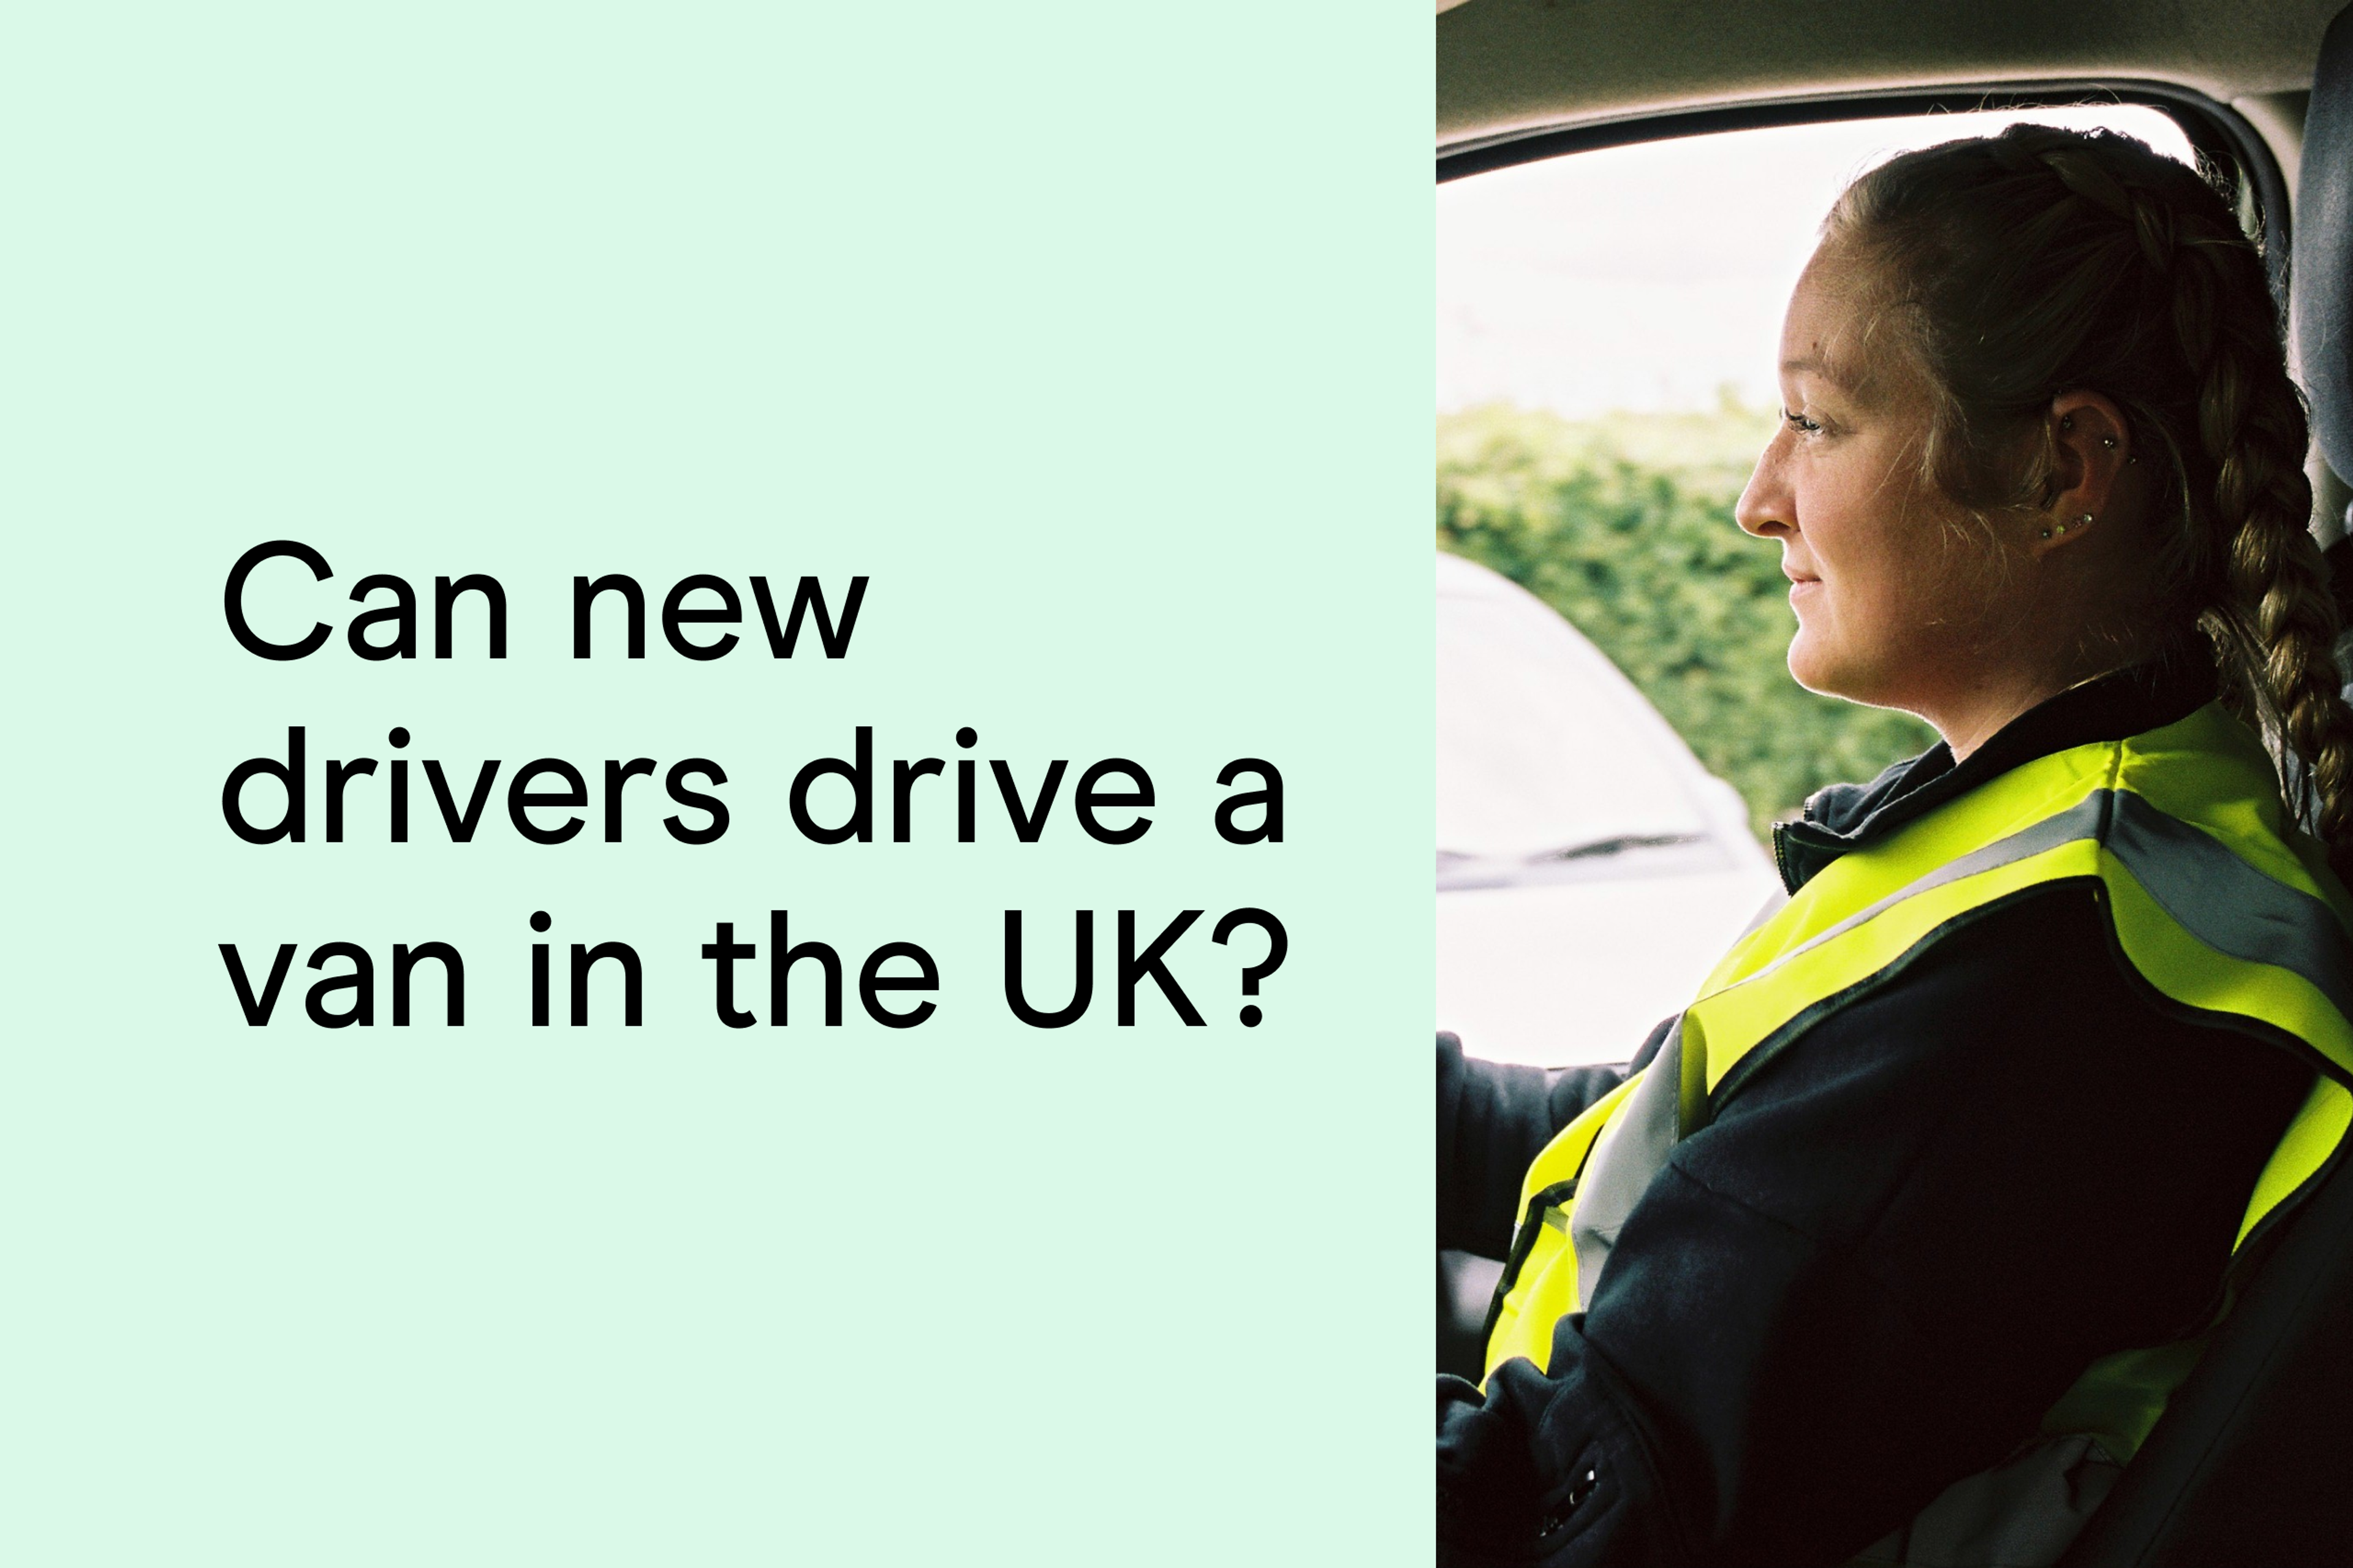 Can new drivers drive a van in the UK?